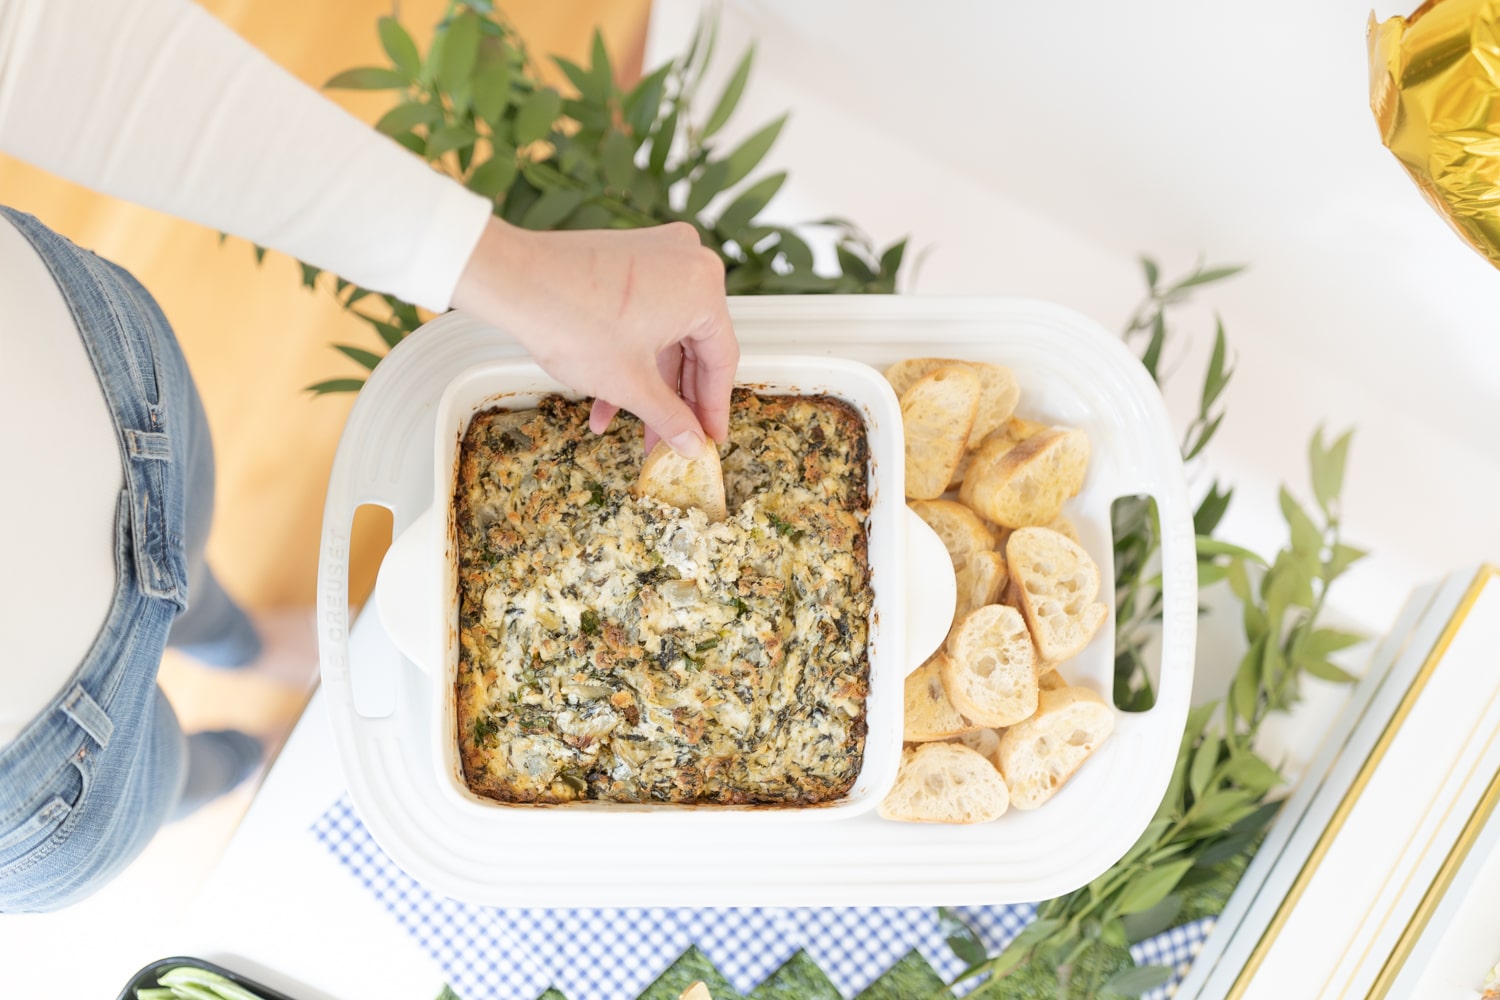 Spinach and cream cheese dip made by blogger Stephanie Ziajka on Diary of a Debutante